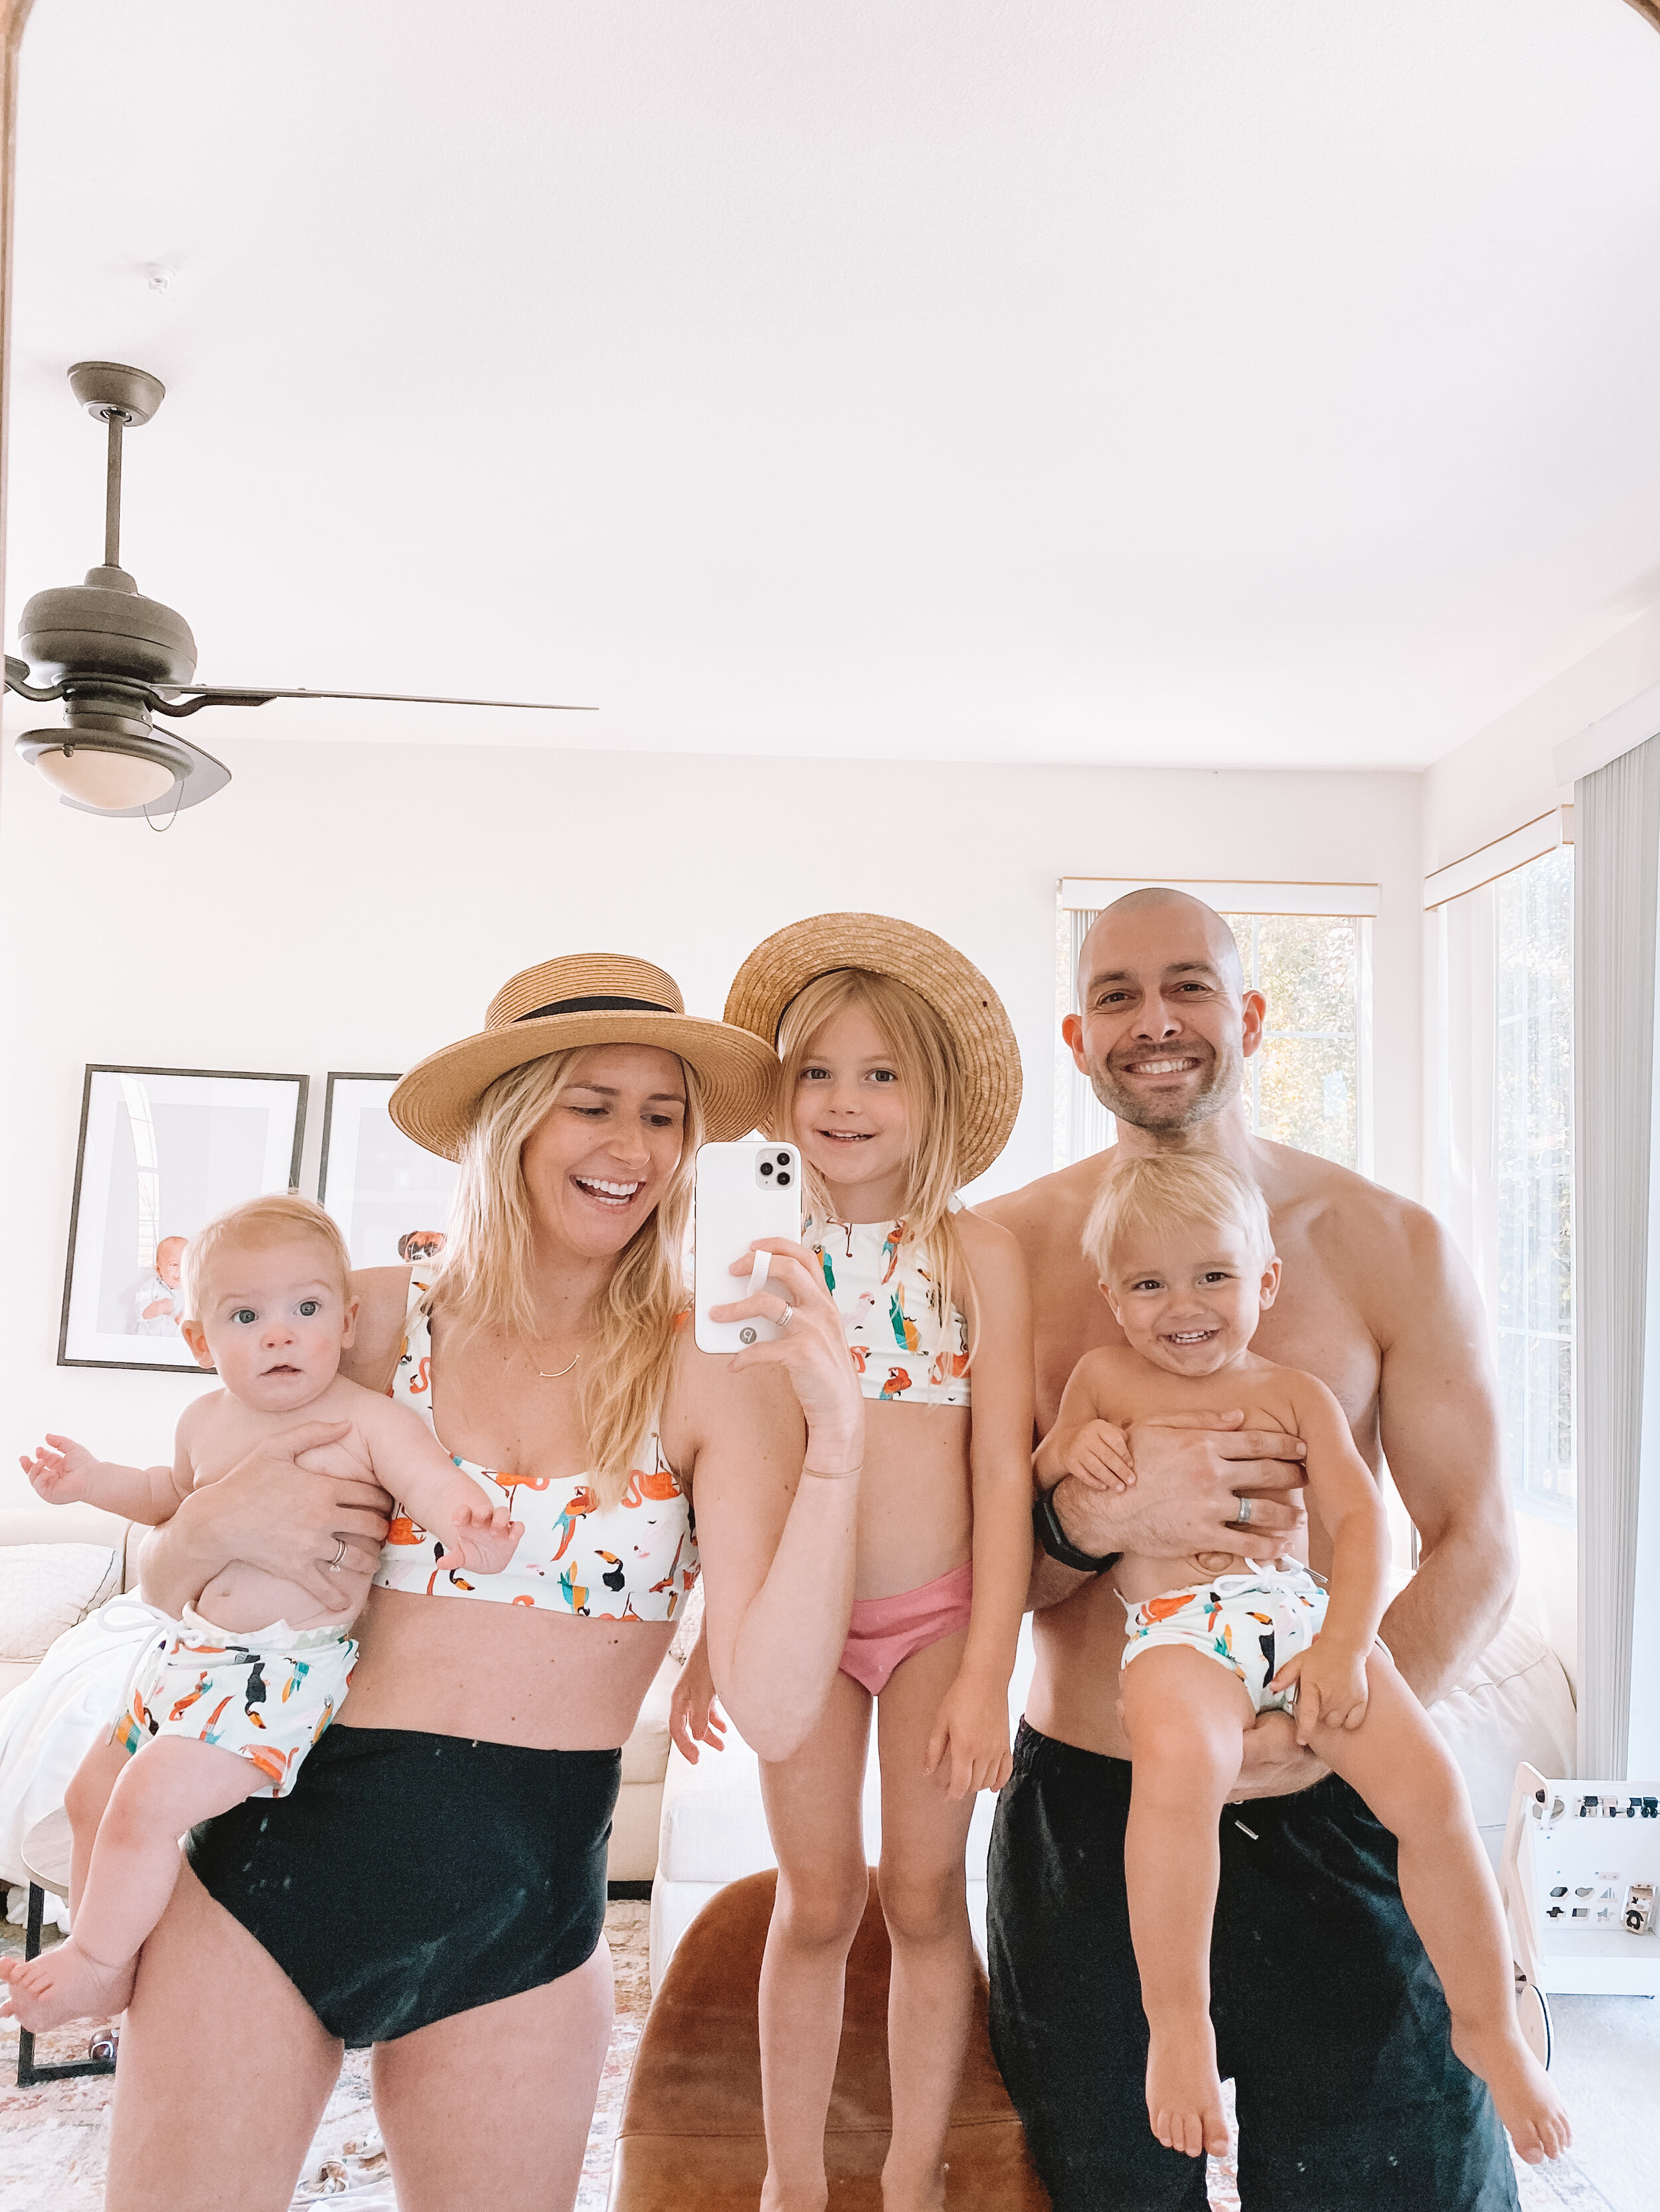 Matching Family Swimsuits - The Overwhelmed Mommy